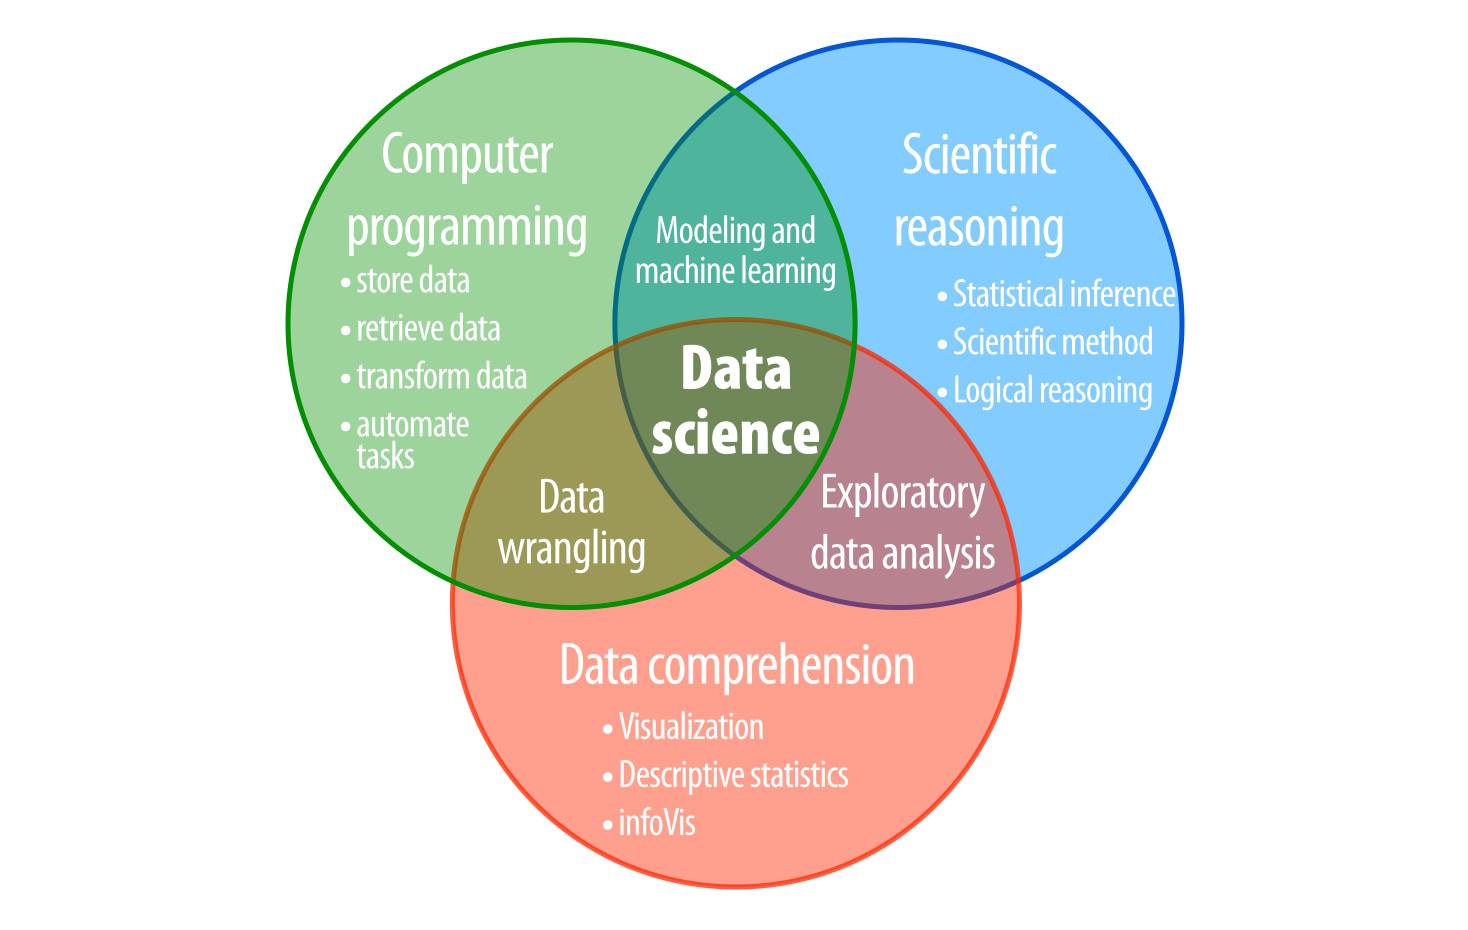 The three core skill sets of data science: computer programming, data comprehension, and scientific reasoning.